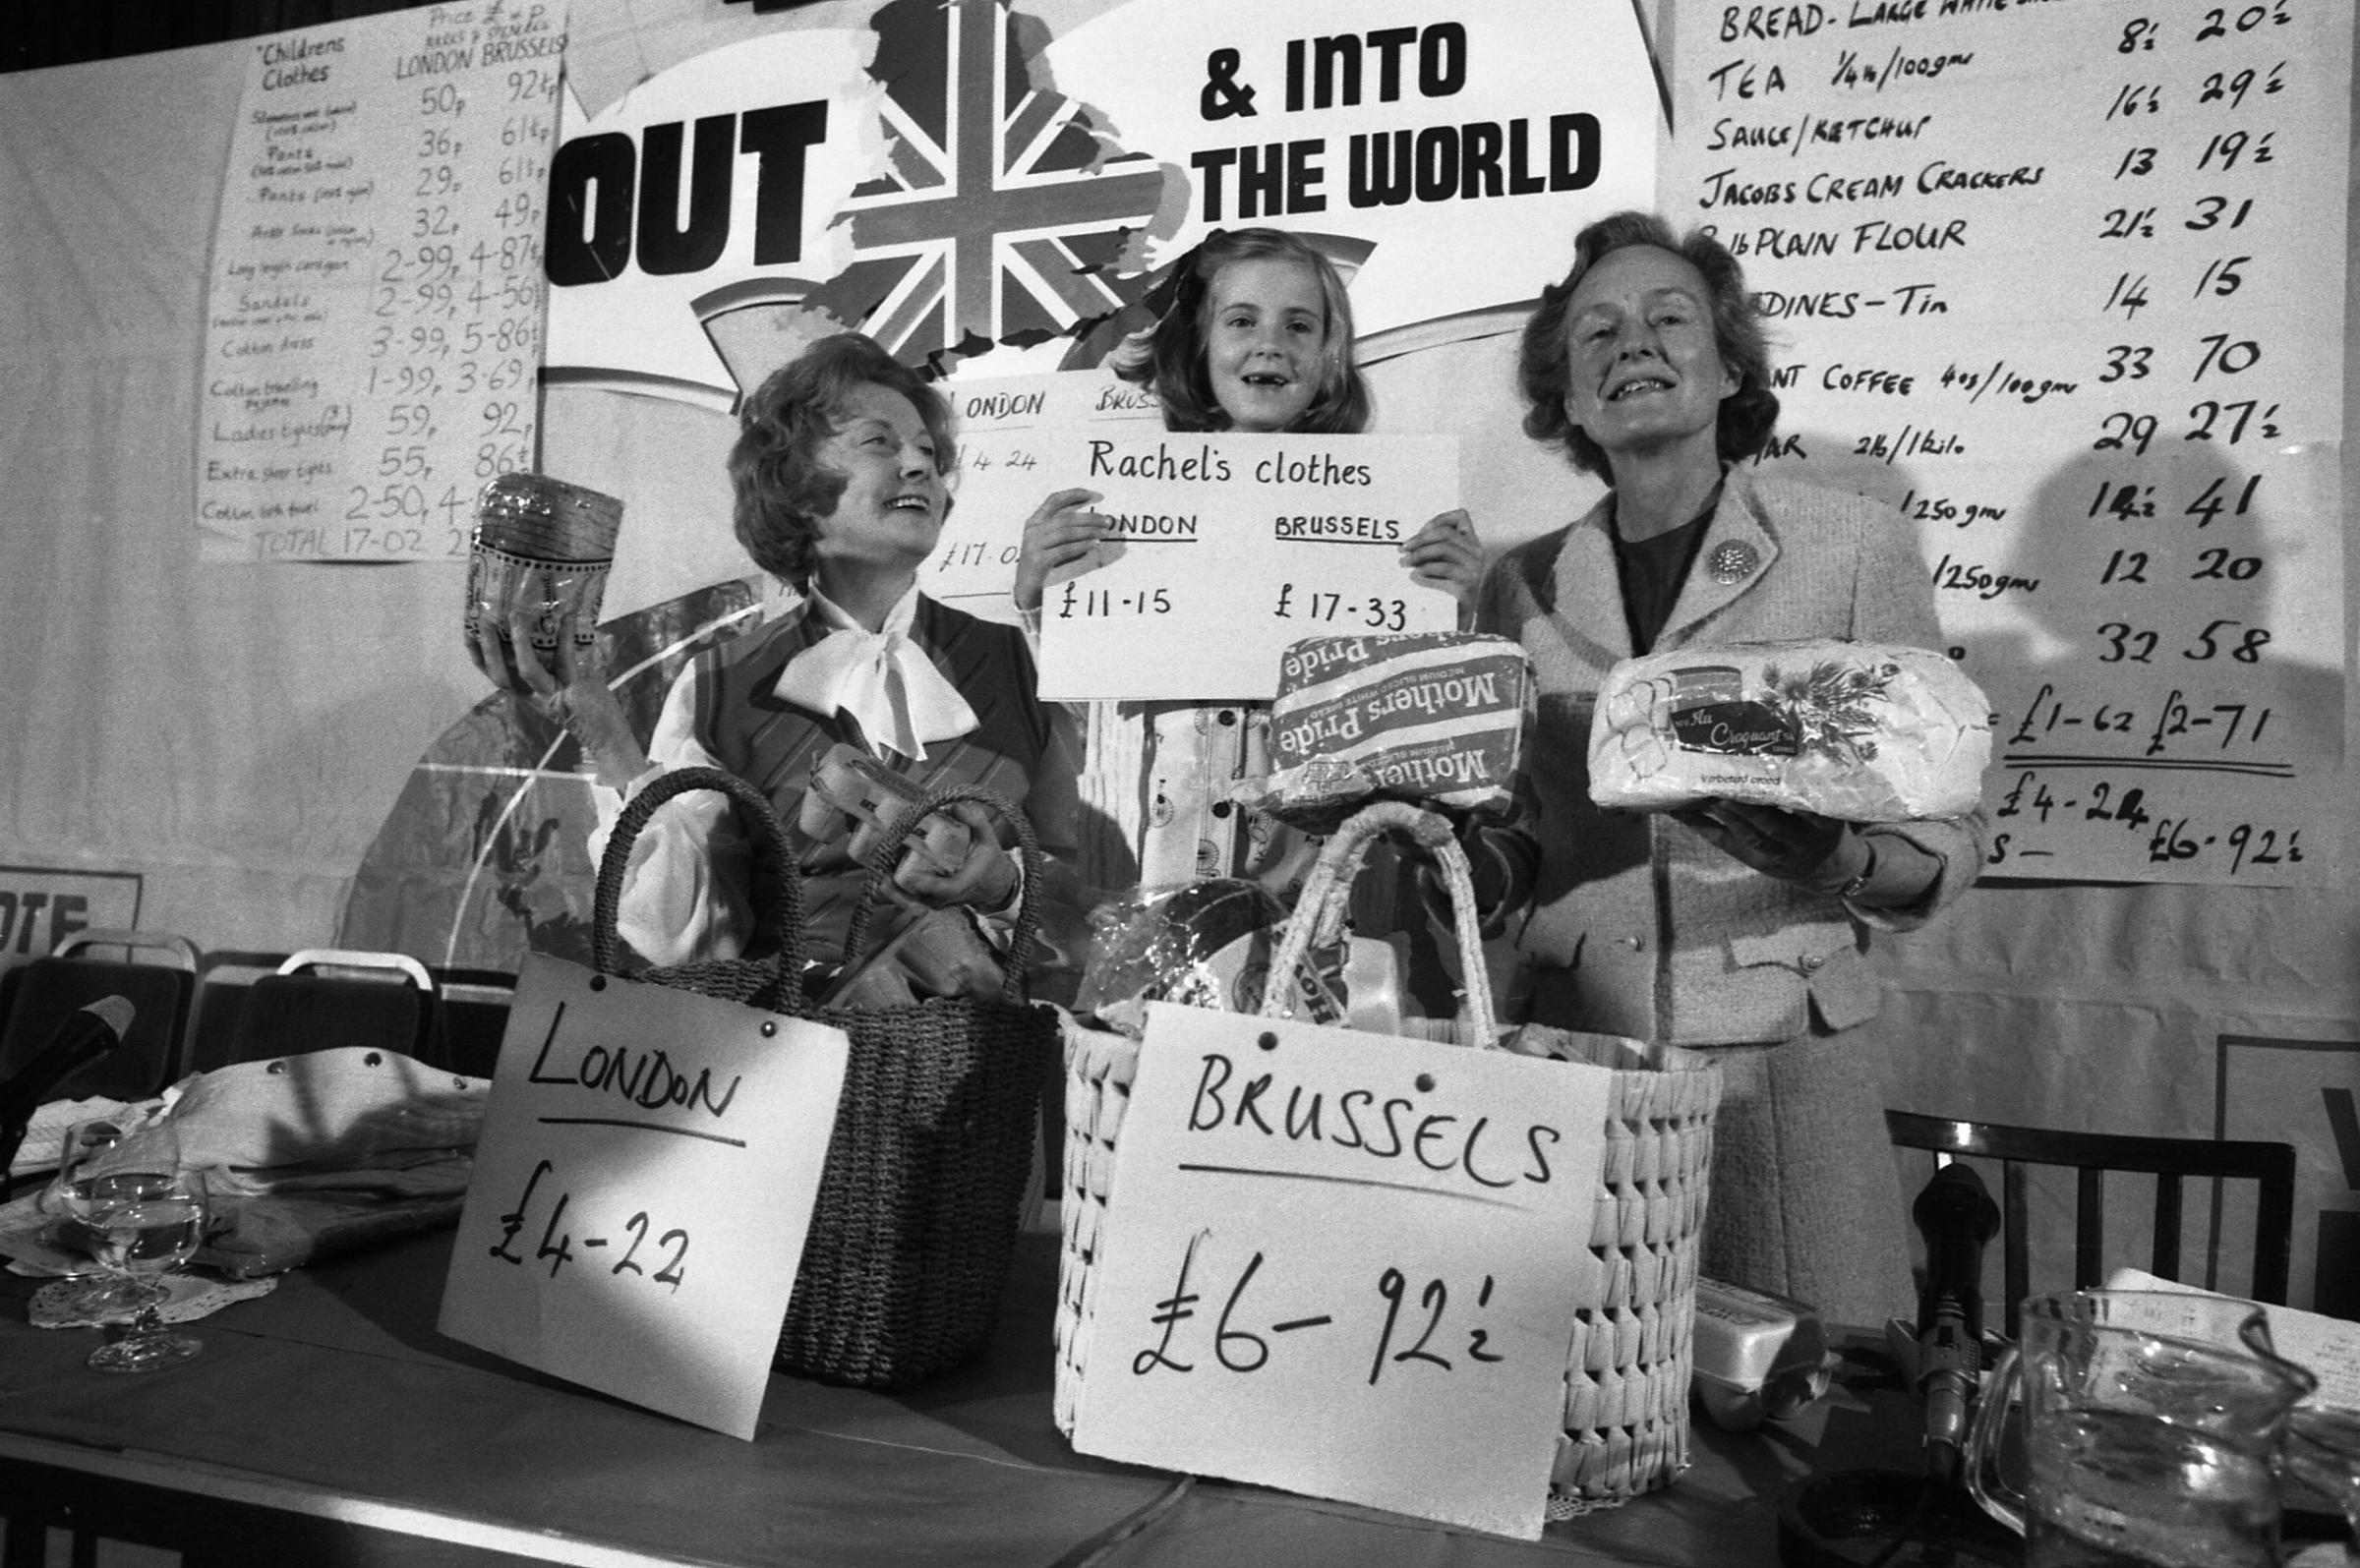 Social Services secretary, Mrs Barbara Castle, left, her seven year old great-niece Rachel Hilton and Mrs Joan Marten, wife of Neil Martin, Chairman of the anti-Common Marketeers (unseen) display goods they brought in London and Brussels with their retrospective prices for comparison during a press conference at the Waldorf Hotel in London, England , May 29, 1975.